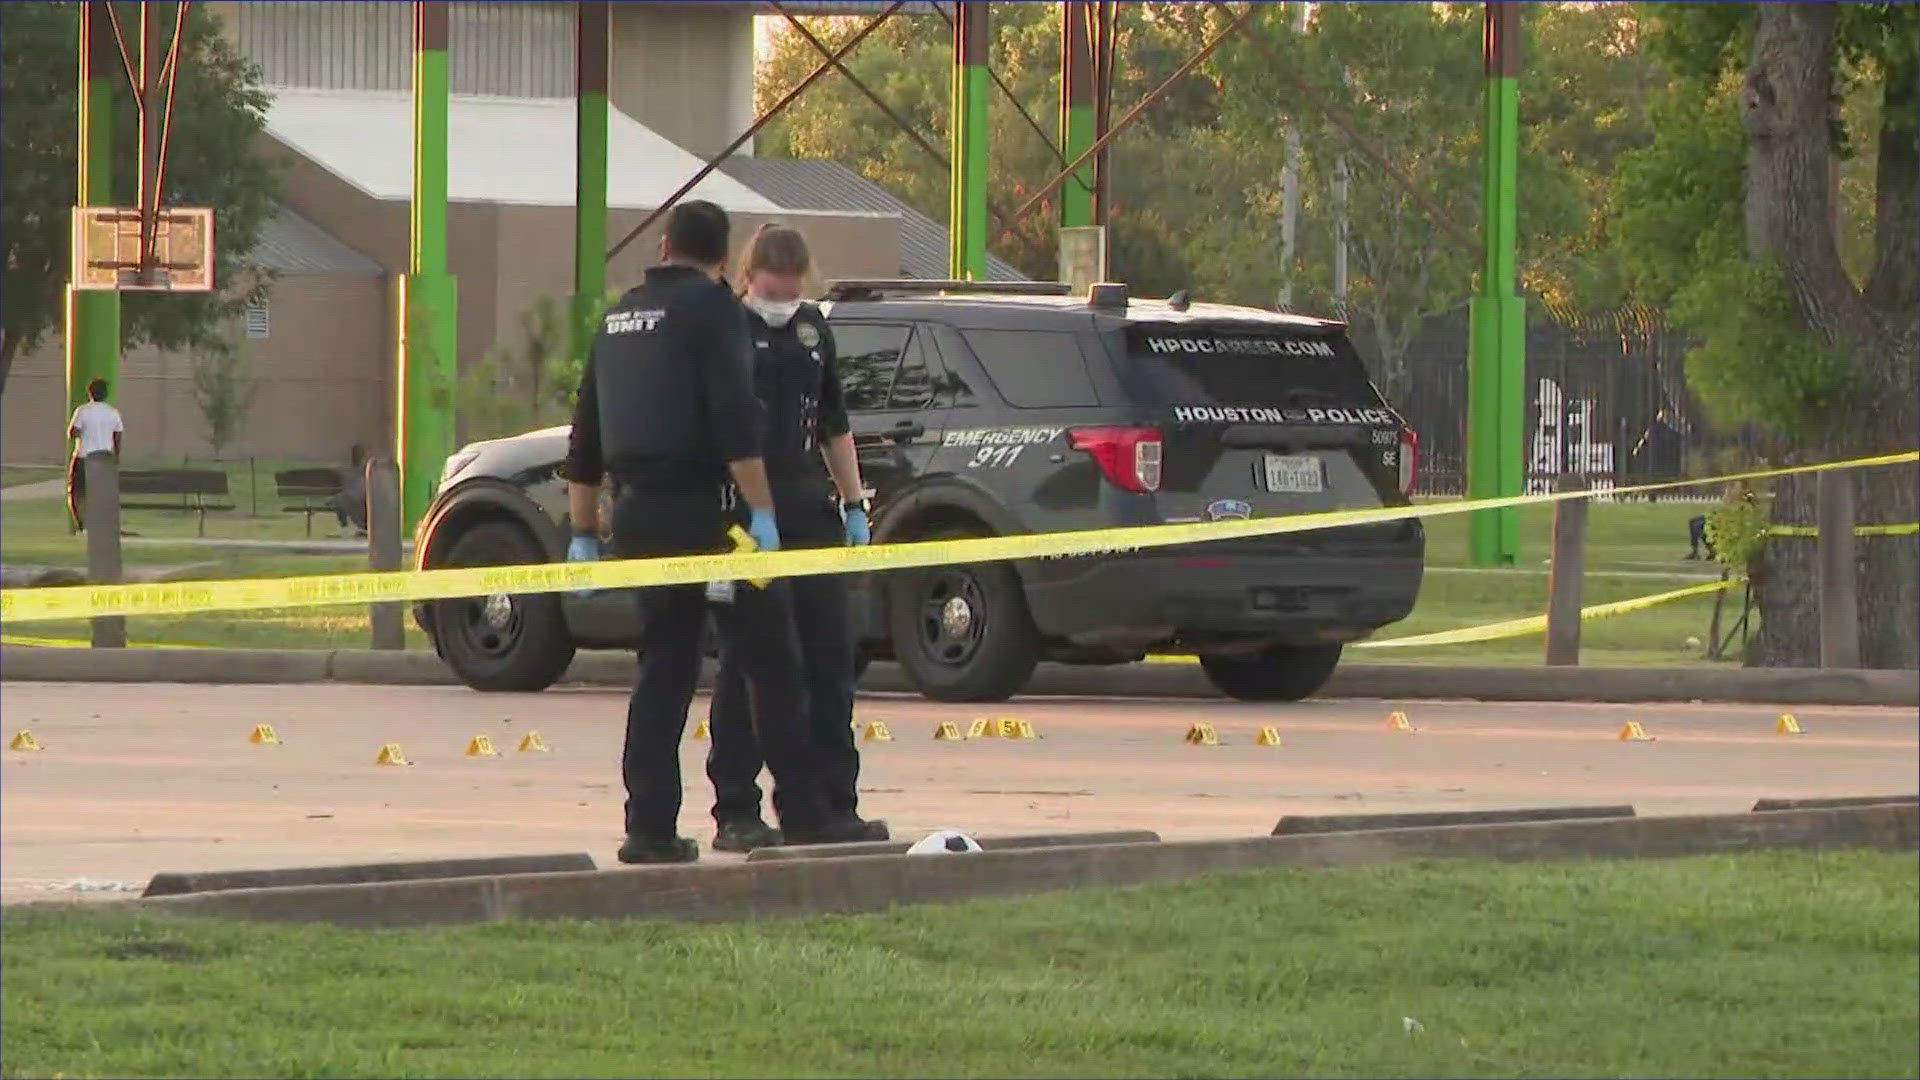 Houston police said an armed man was shot by their officers on Saturday.